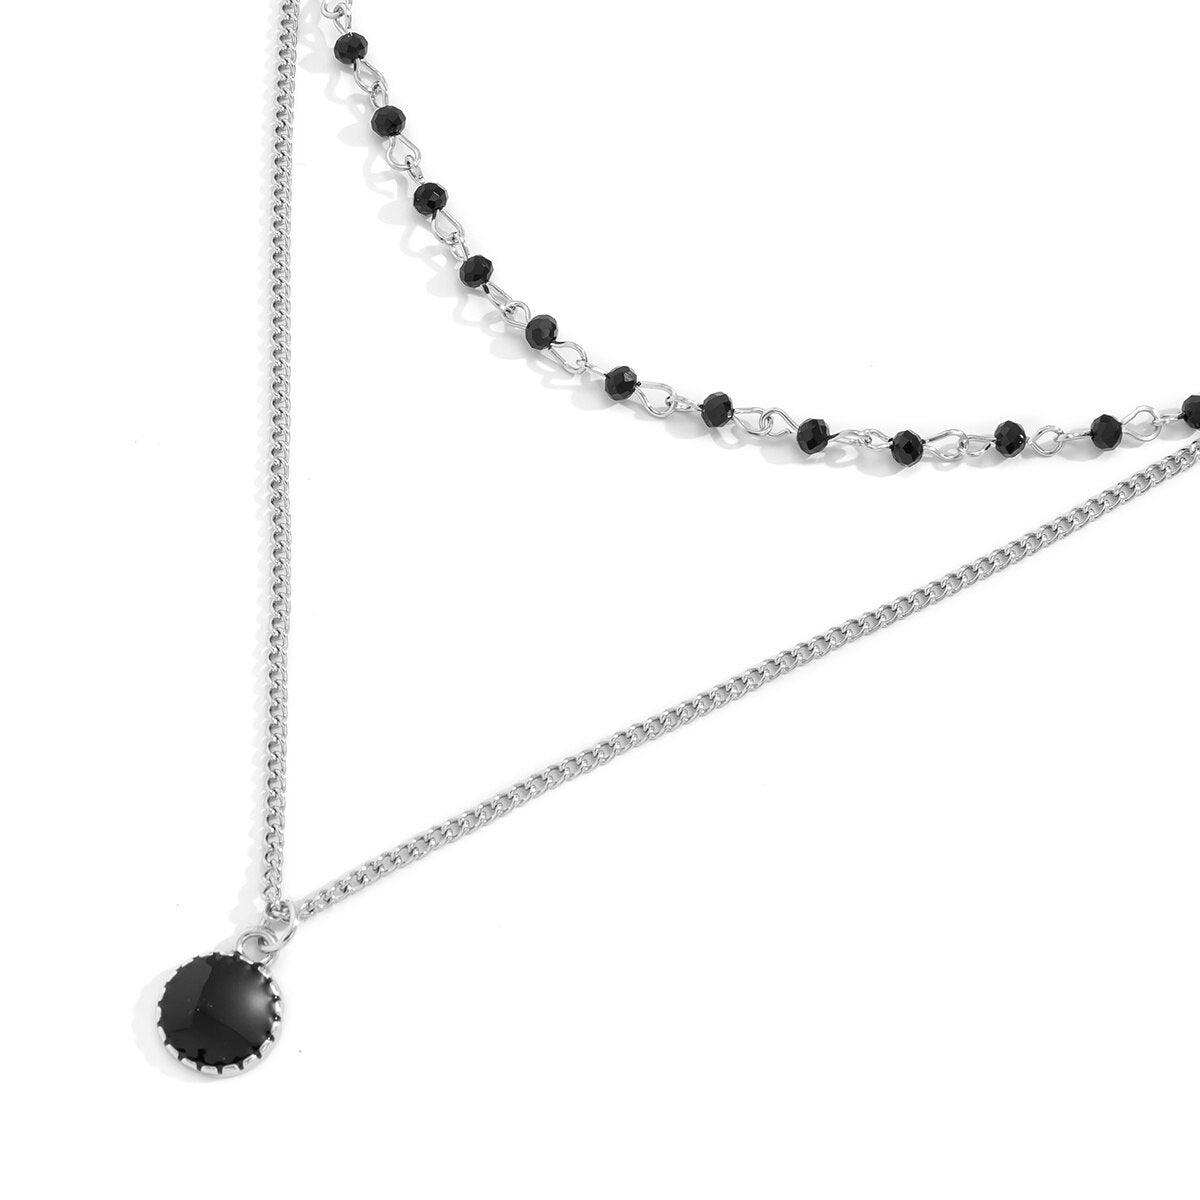 Crystal Bead Chain Necklace Set (2 Pieces) 4